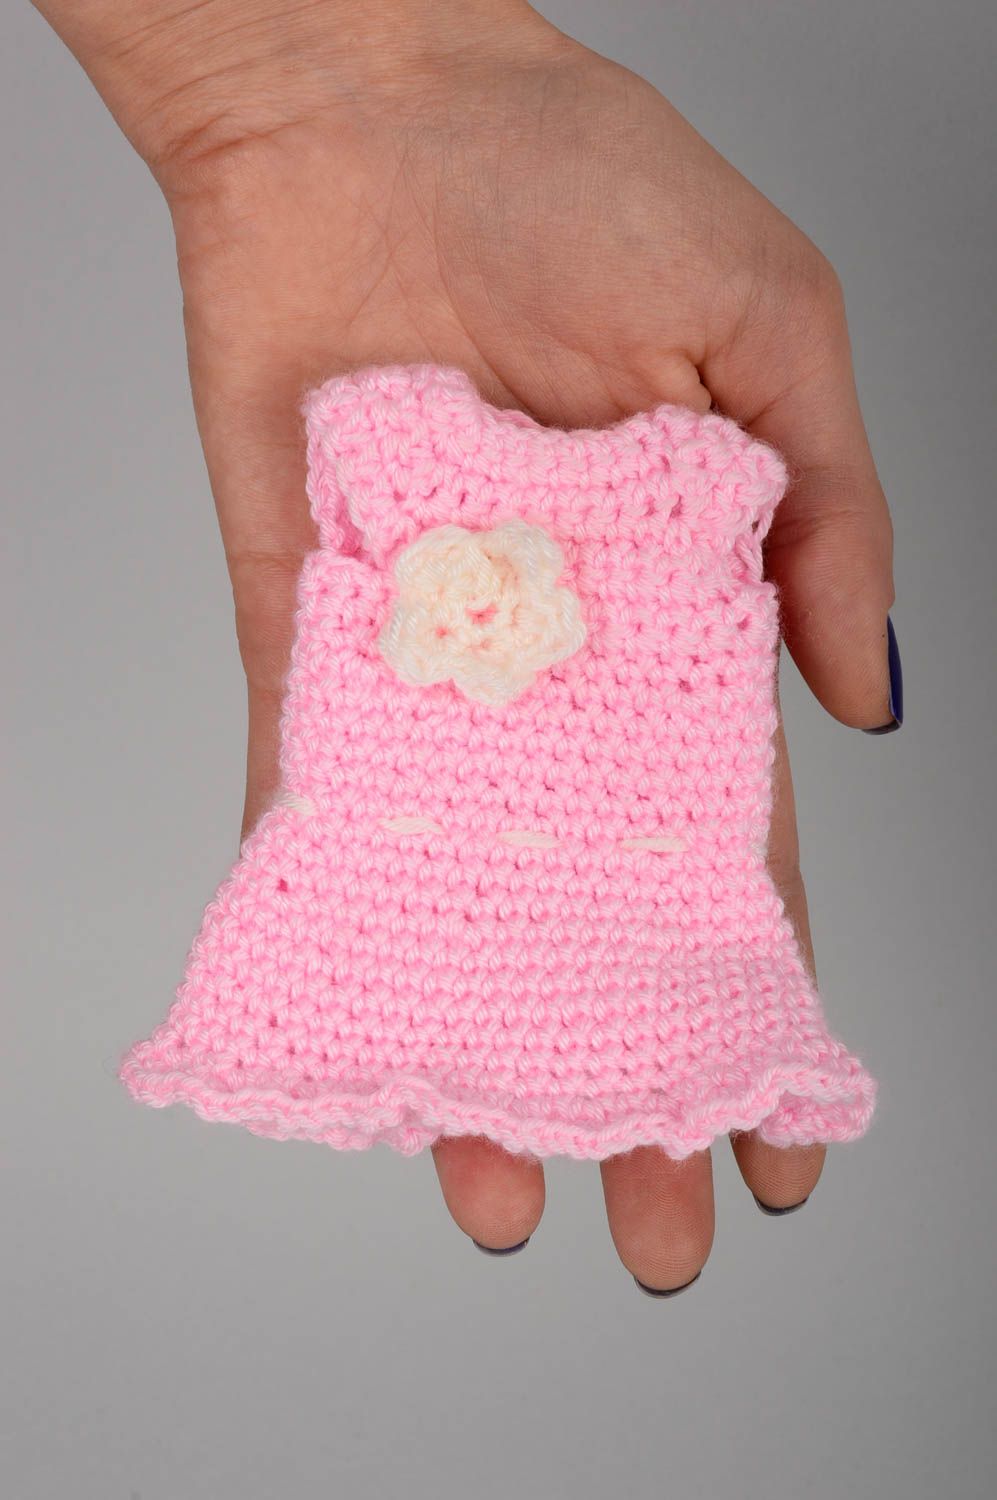 Unusual handmade crochet doll dress doll clothes doll games best toys for kids photo 2